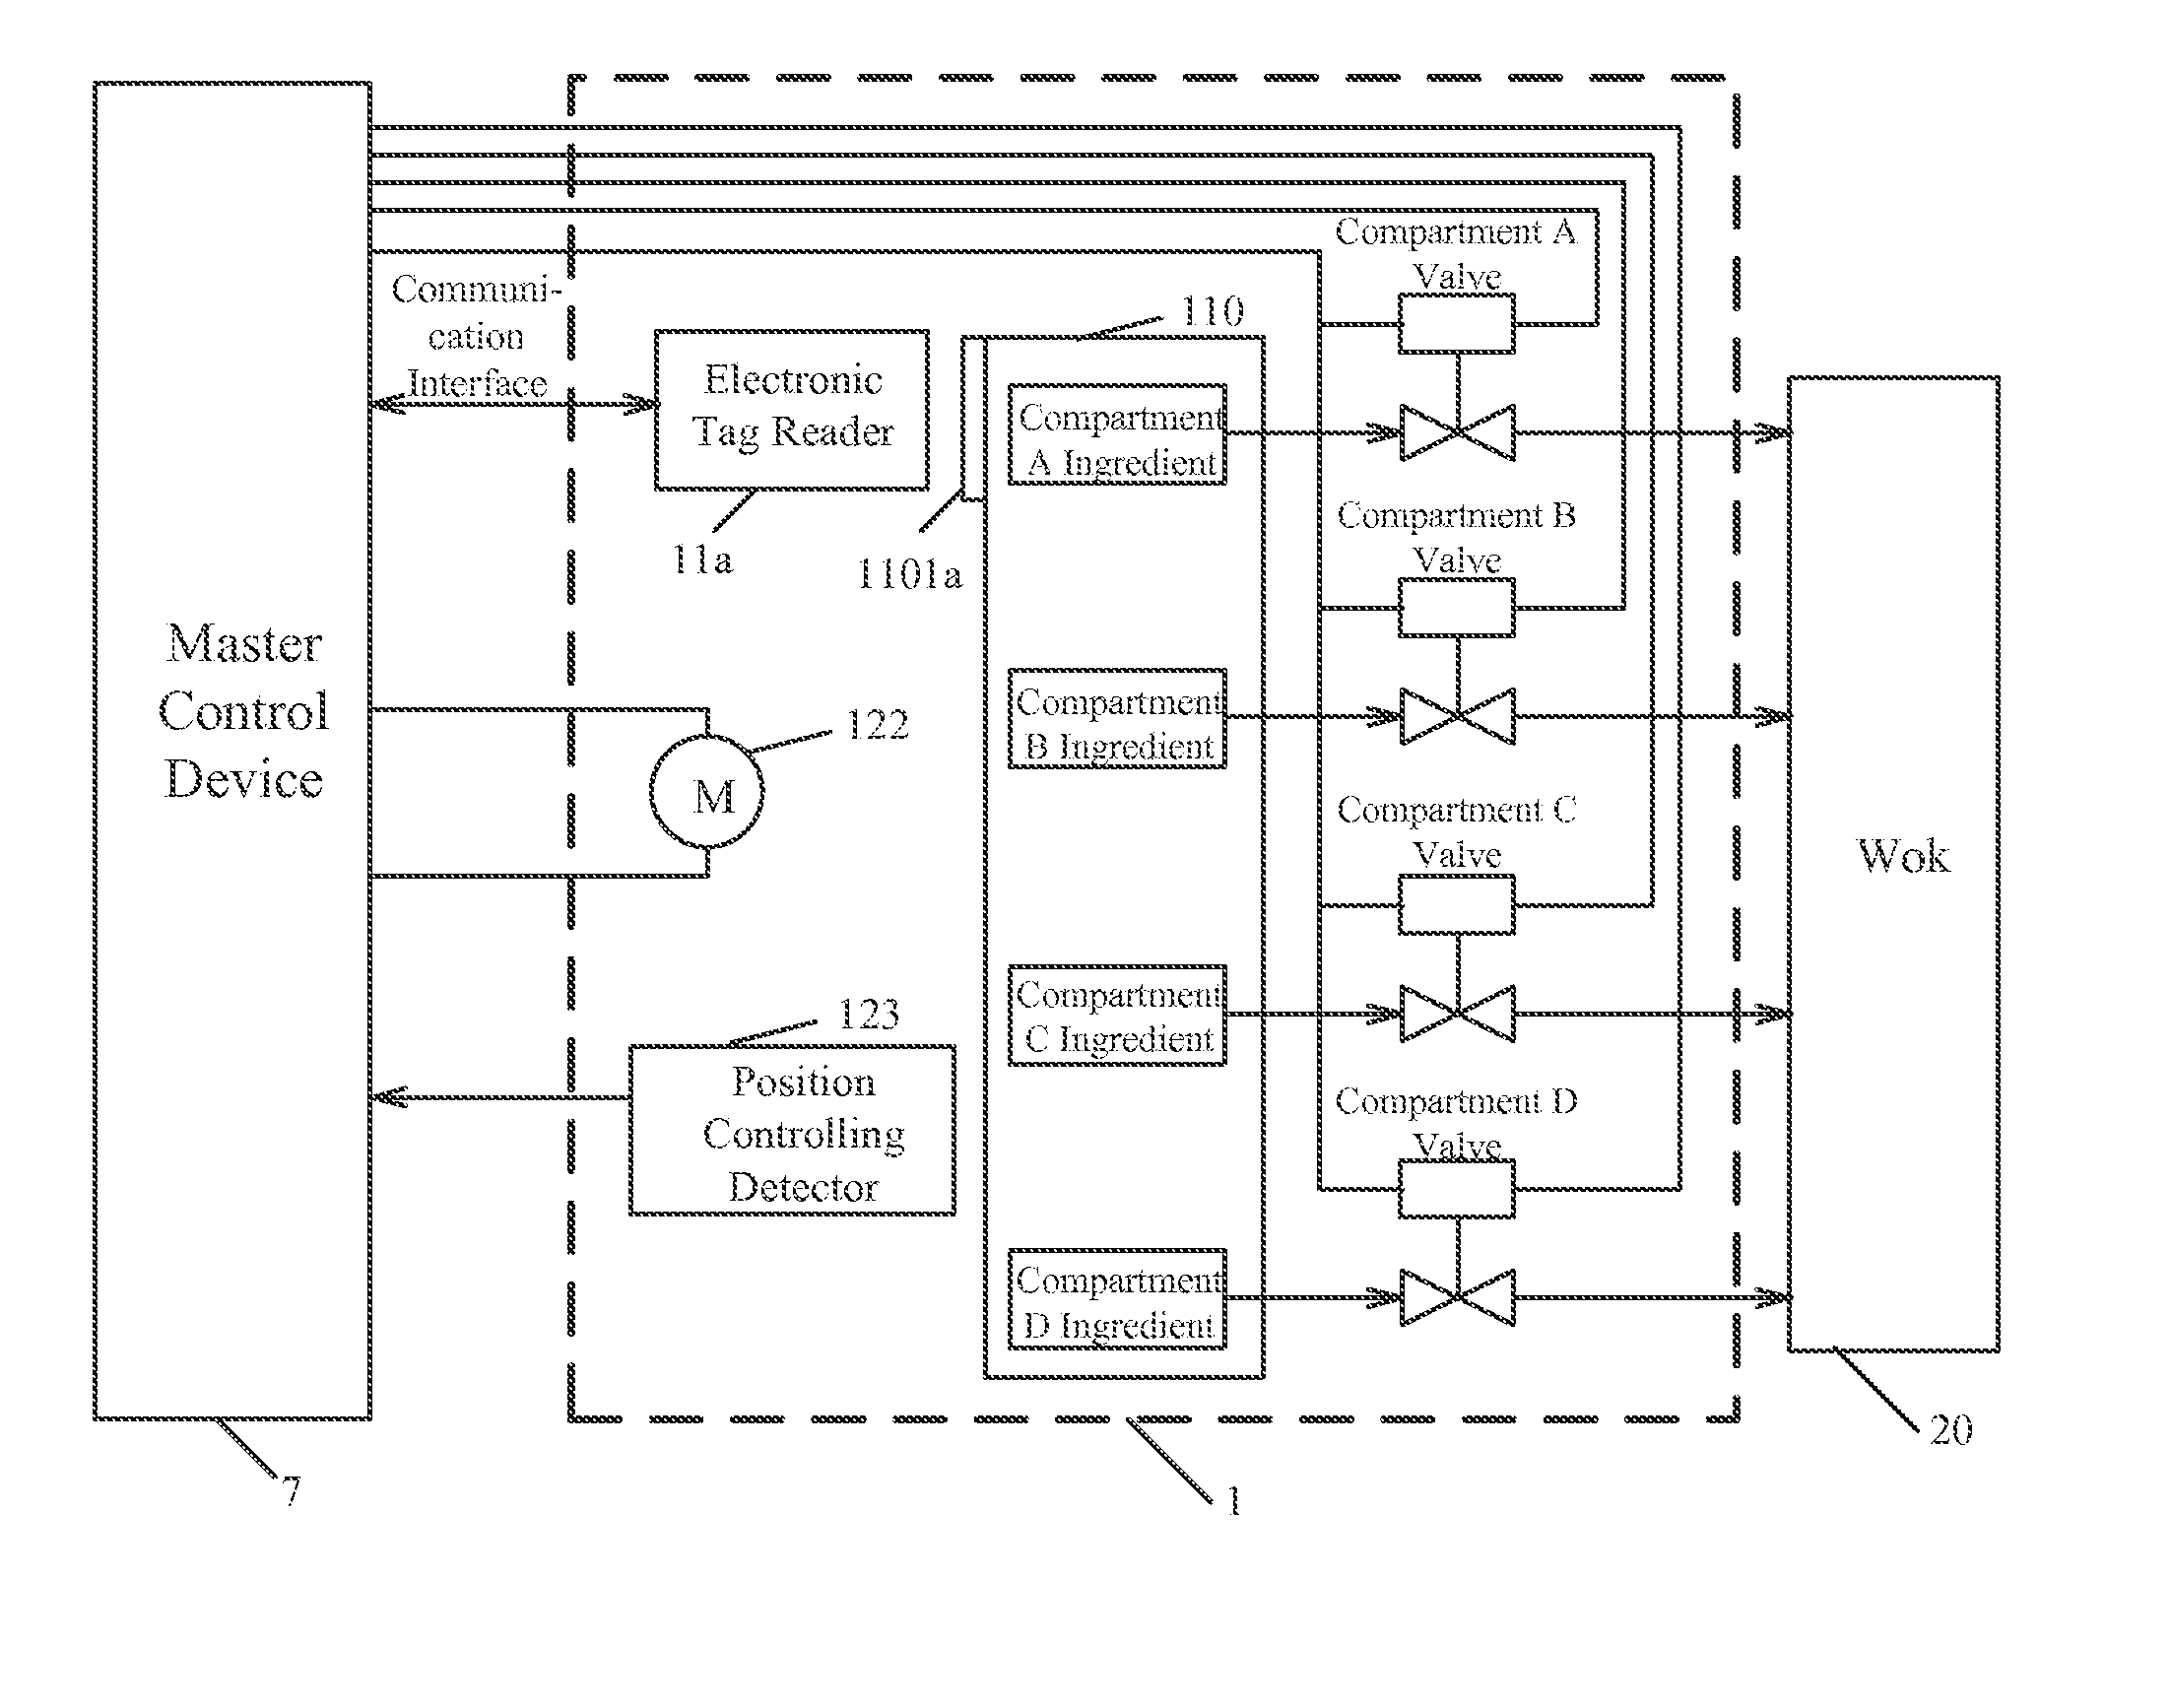 Automatic ingredient feeding apparatus applicable in a fully automated cooking machine